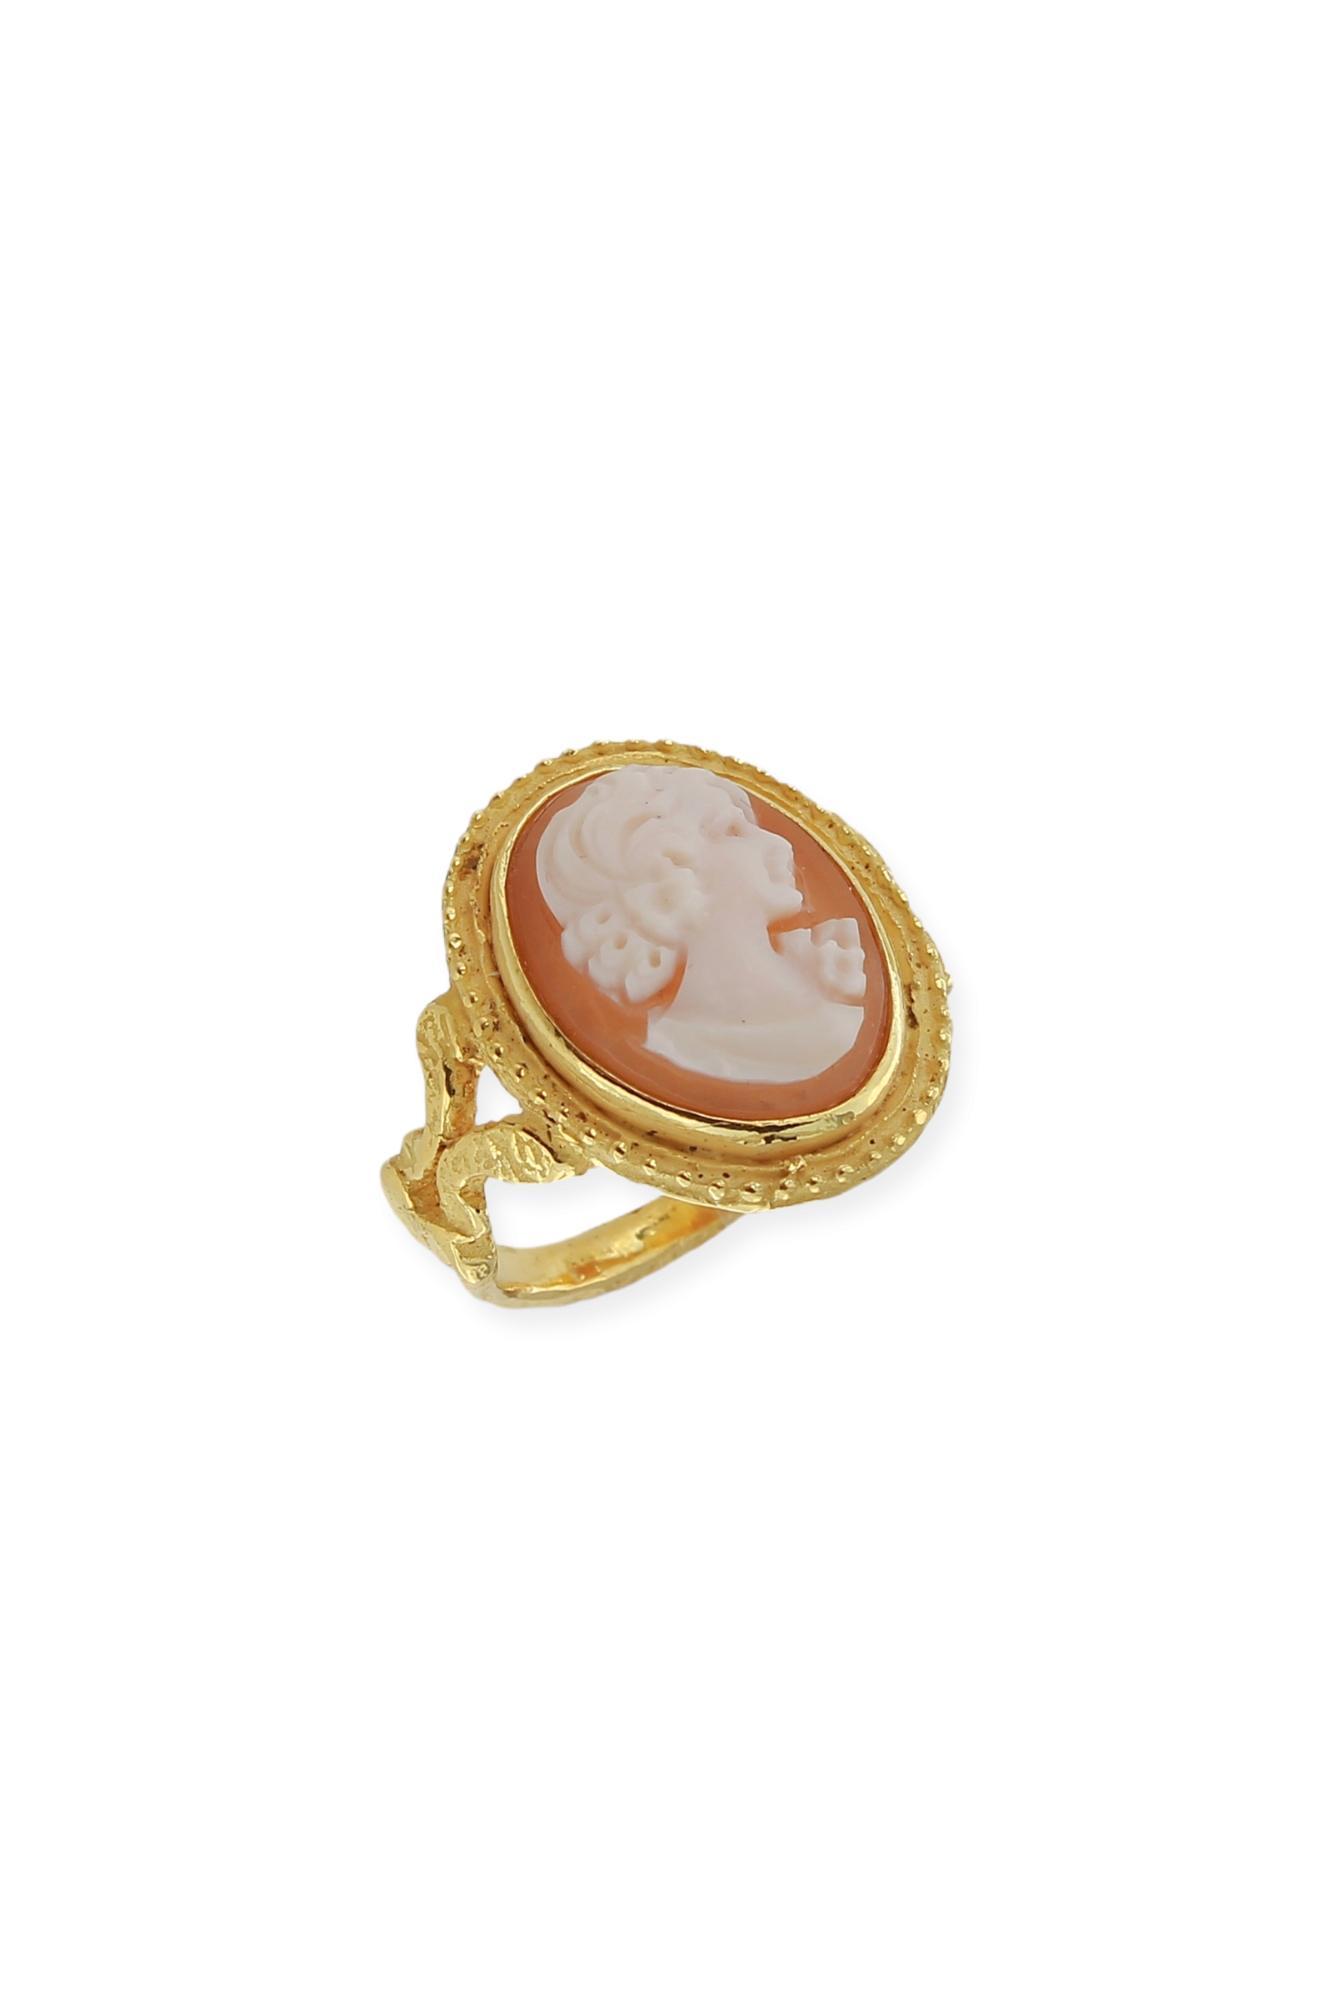 SE616A-18-Kt-Yellow-Gold-Ring-with-Cameo-1